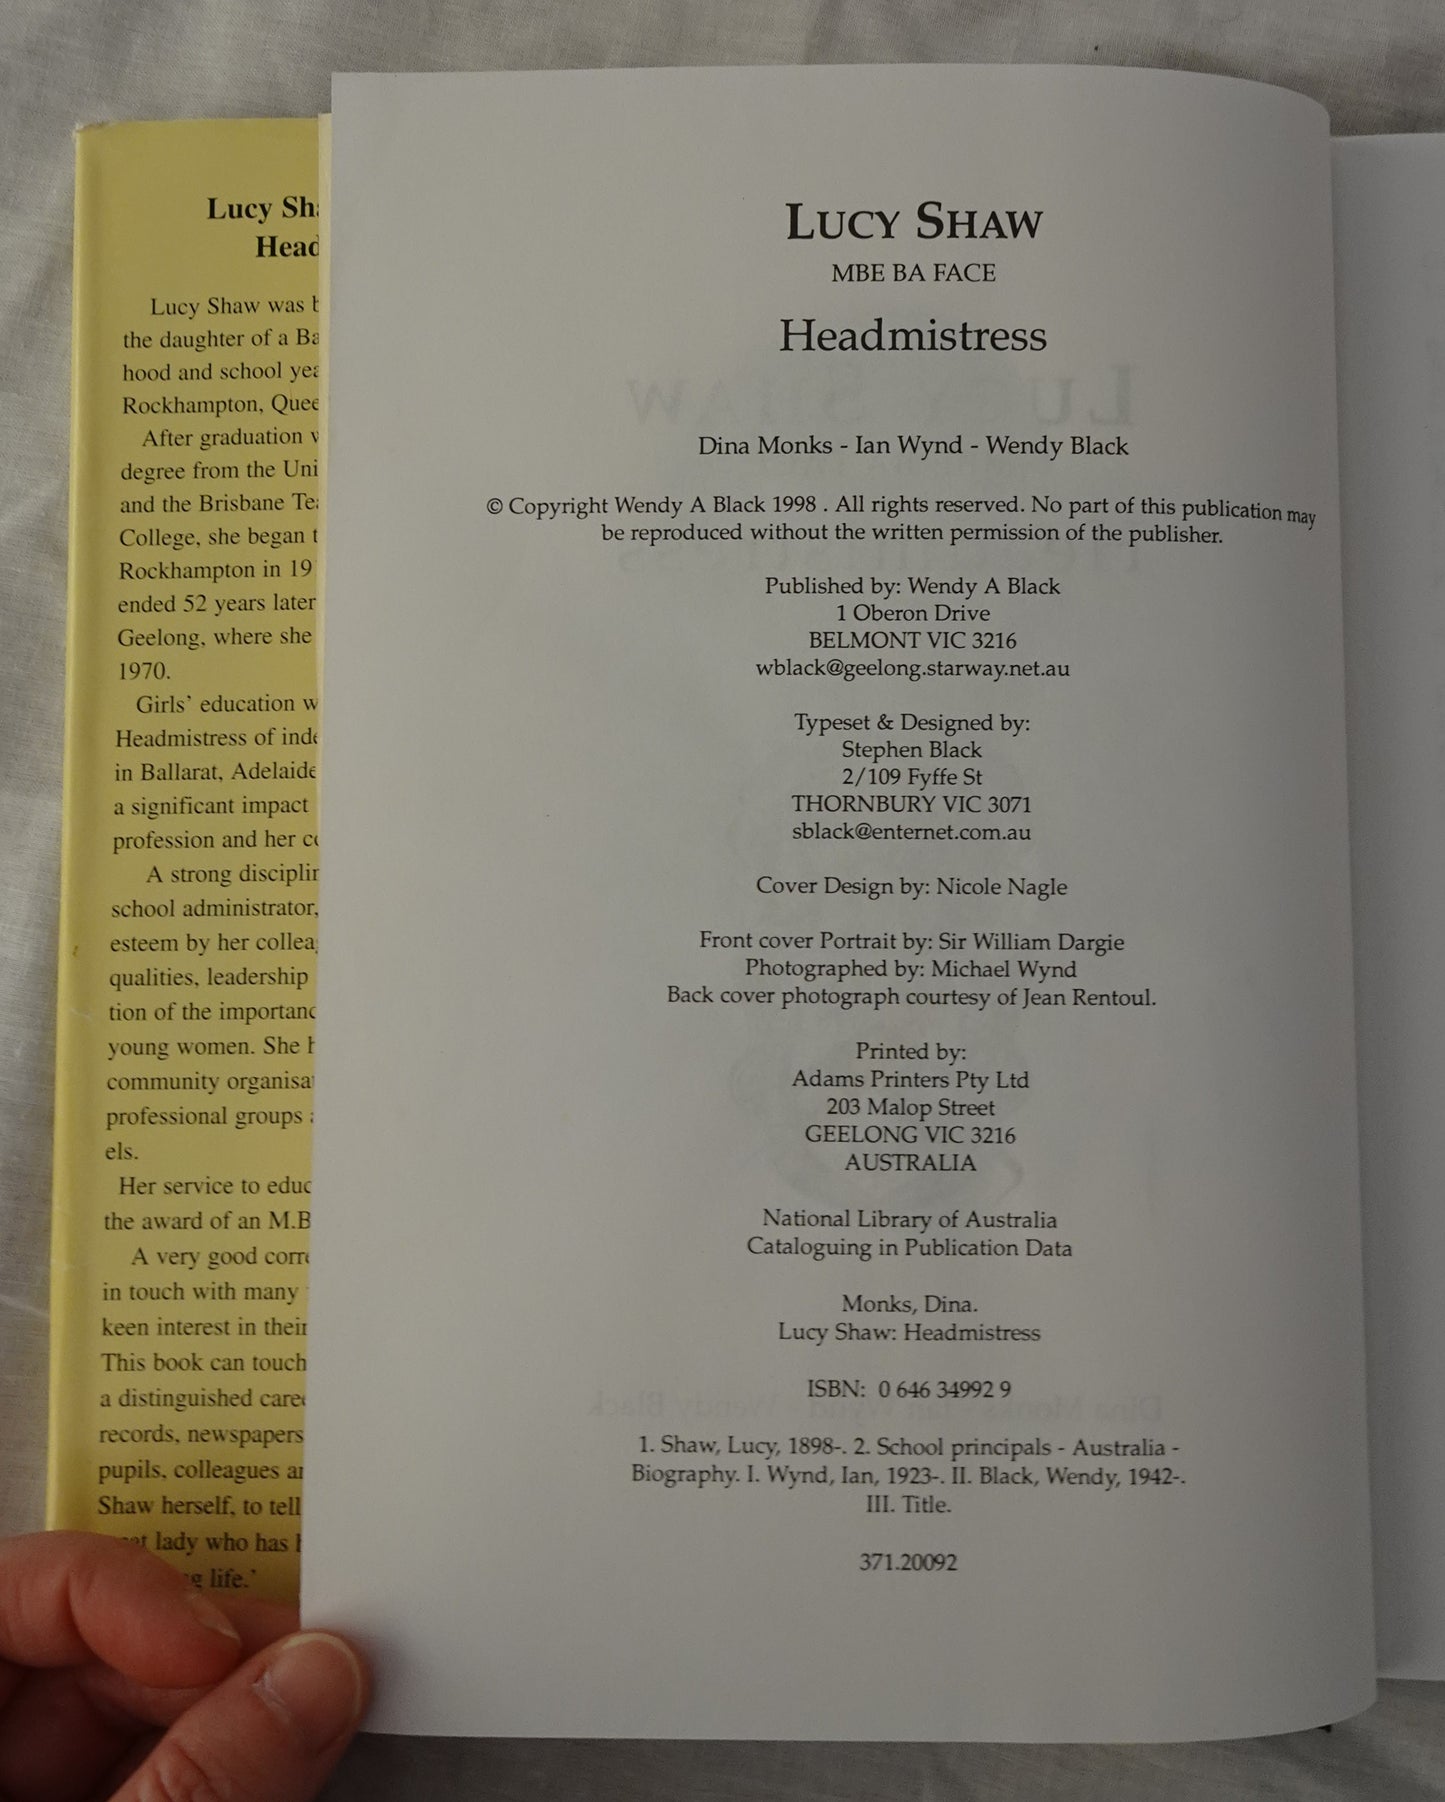 Lucy Shaw Headmistress by Dina Monks, Ian Wynd and Wendy Black